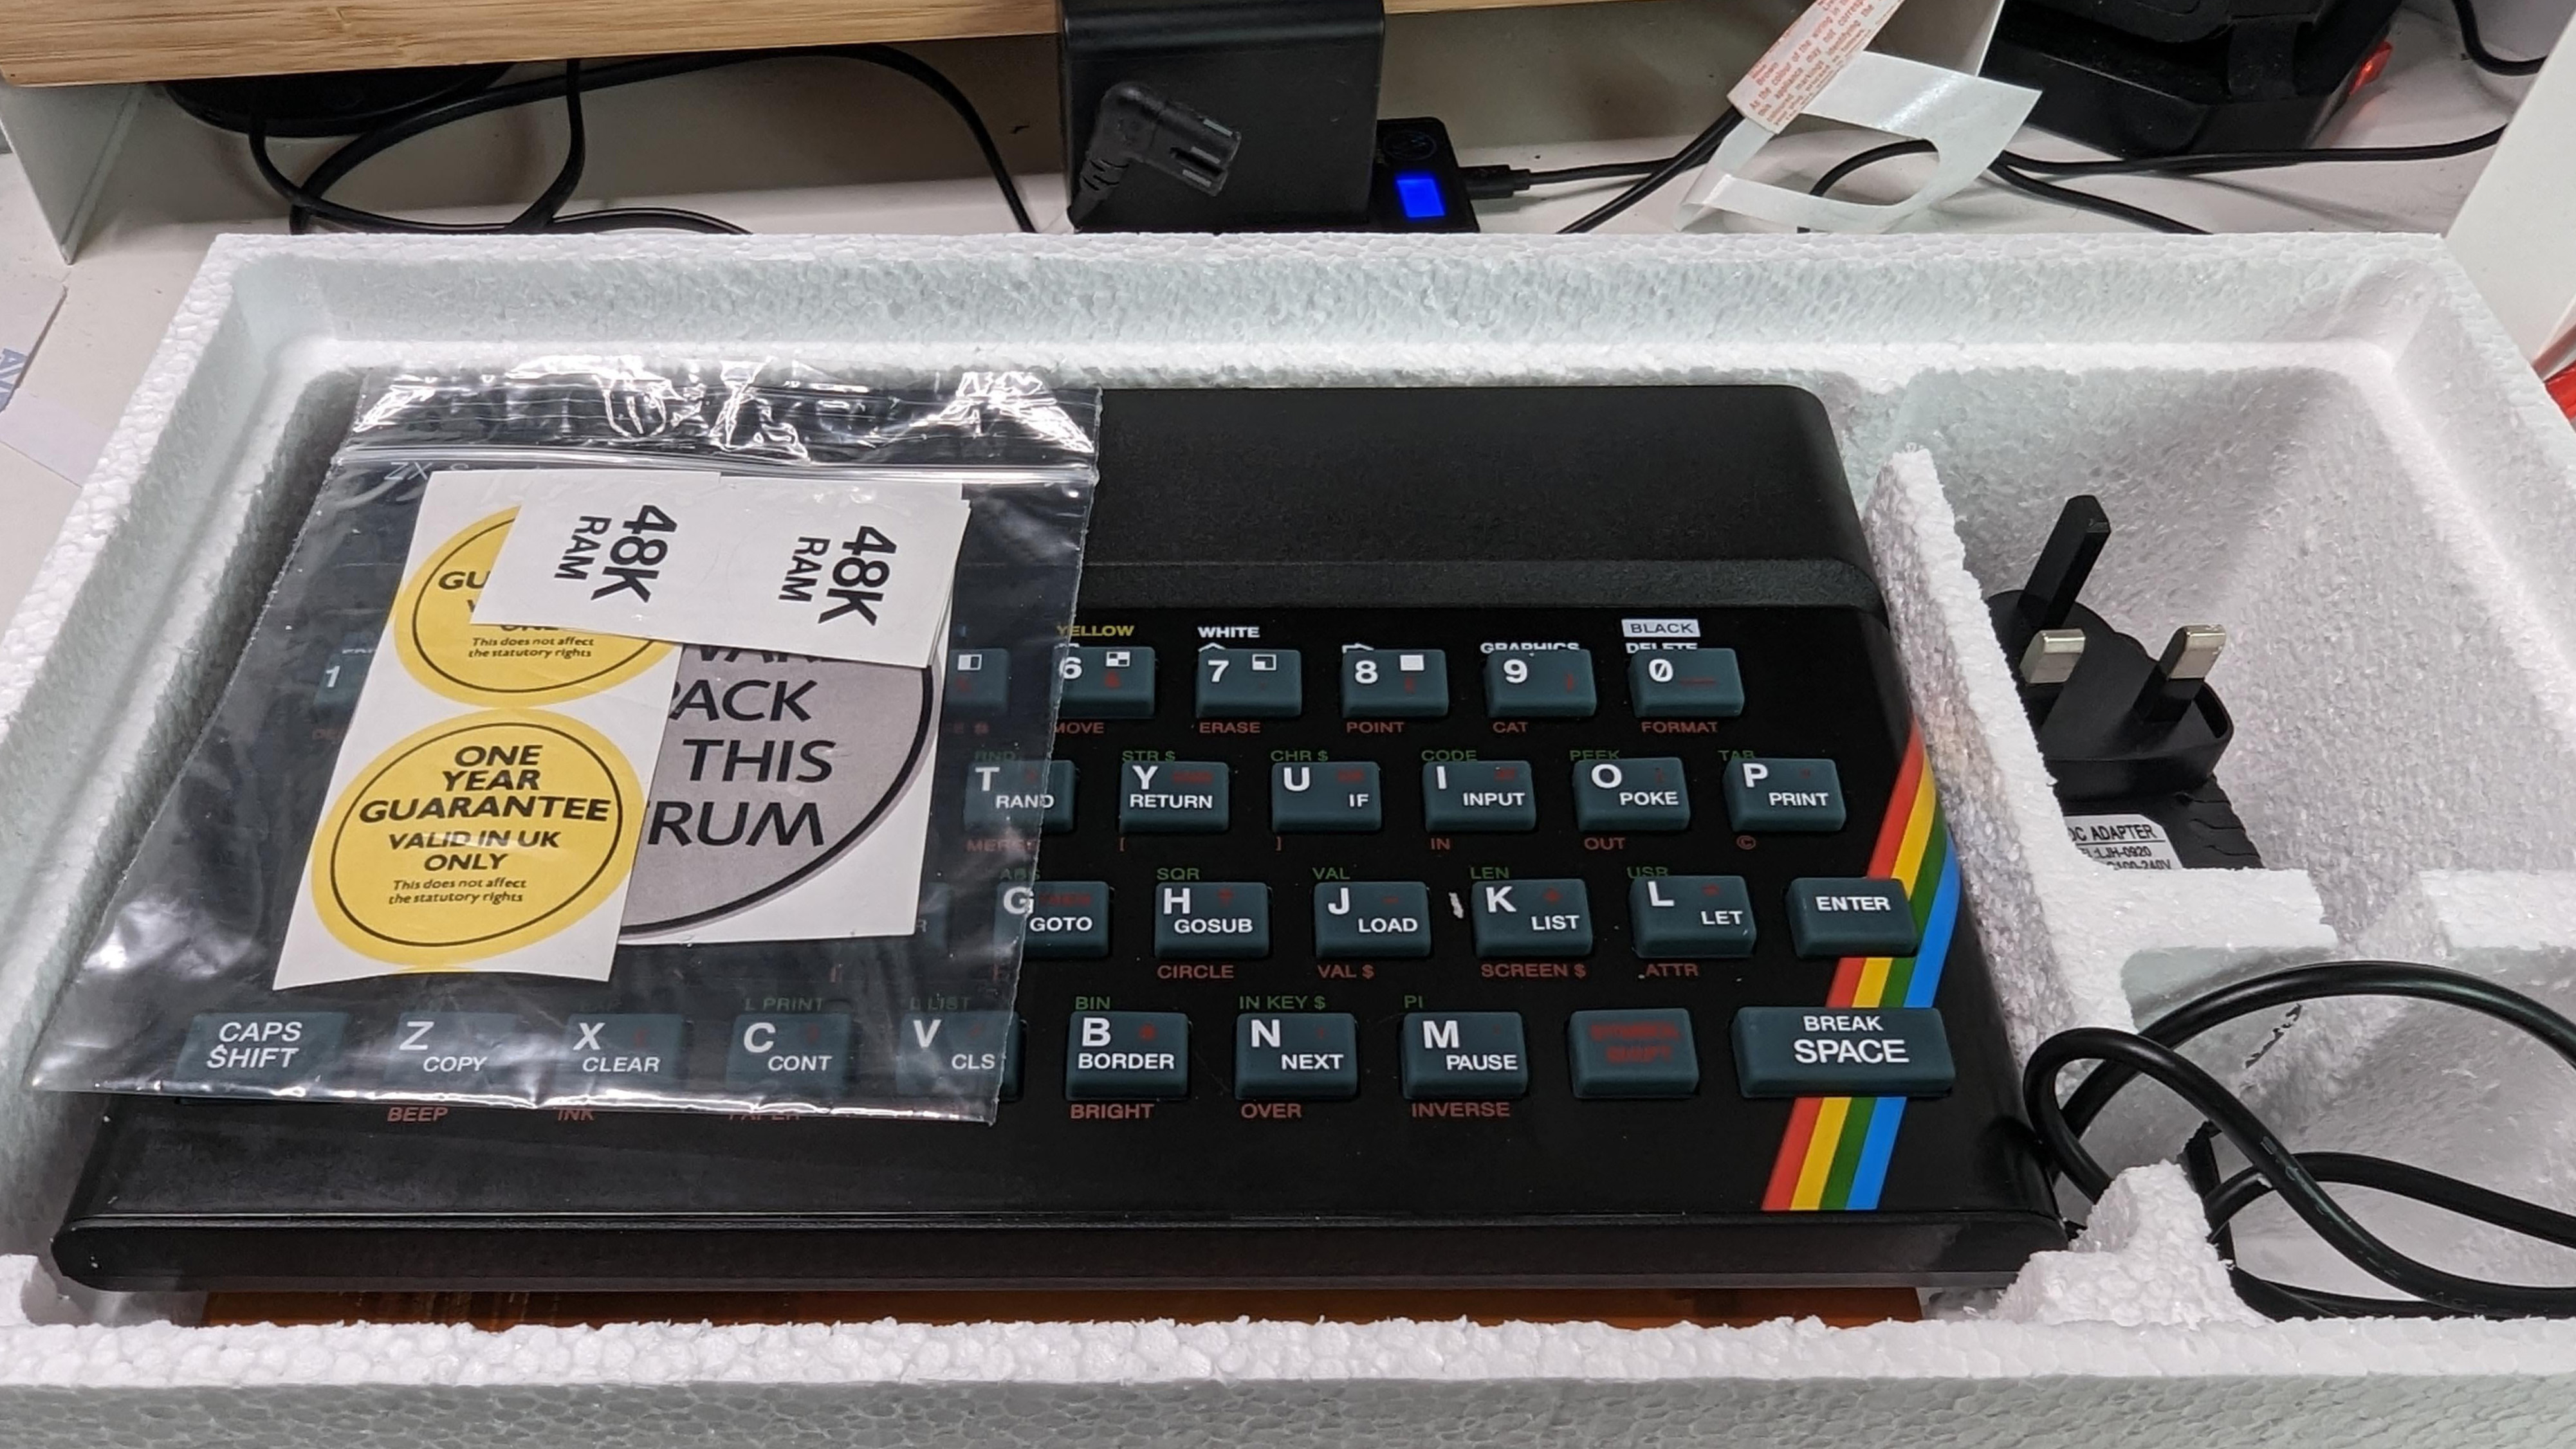 ZX Spectrum Recreation Goes Next Level with New Manuals and Pack 